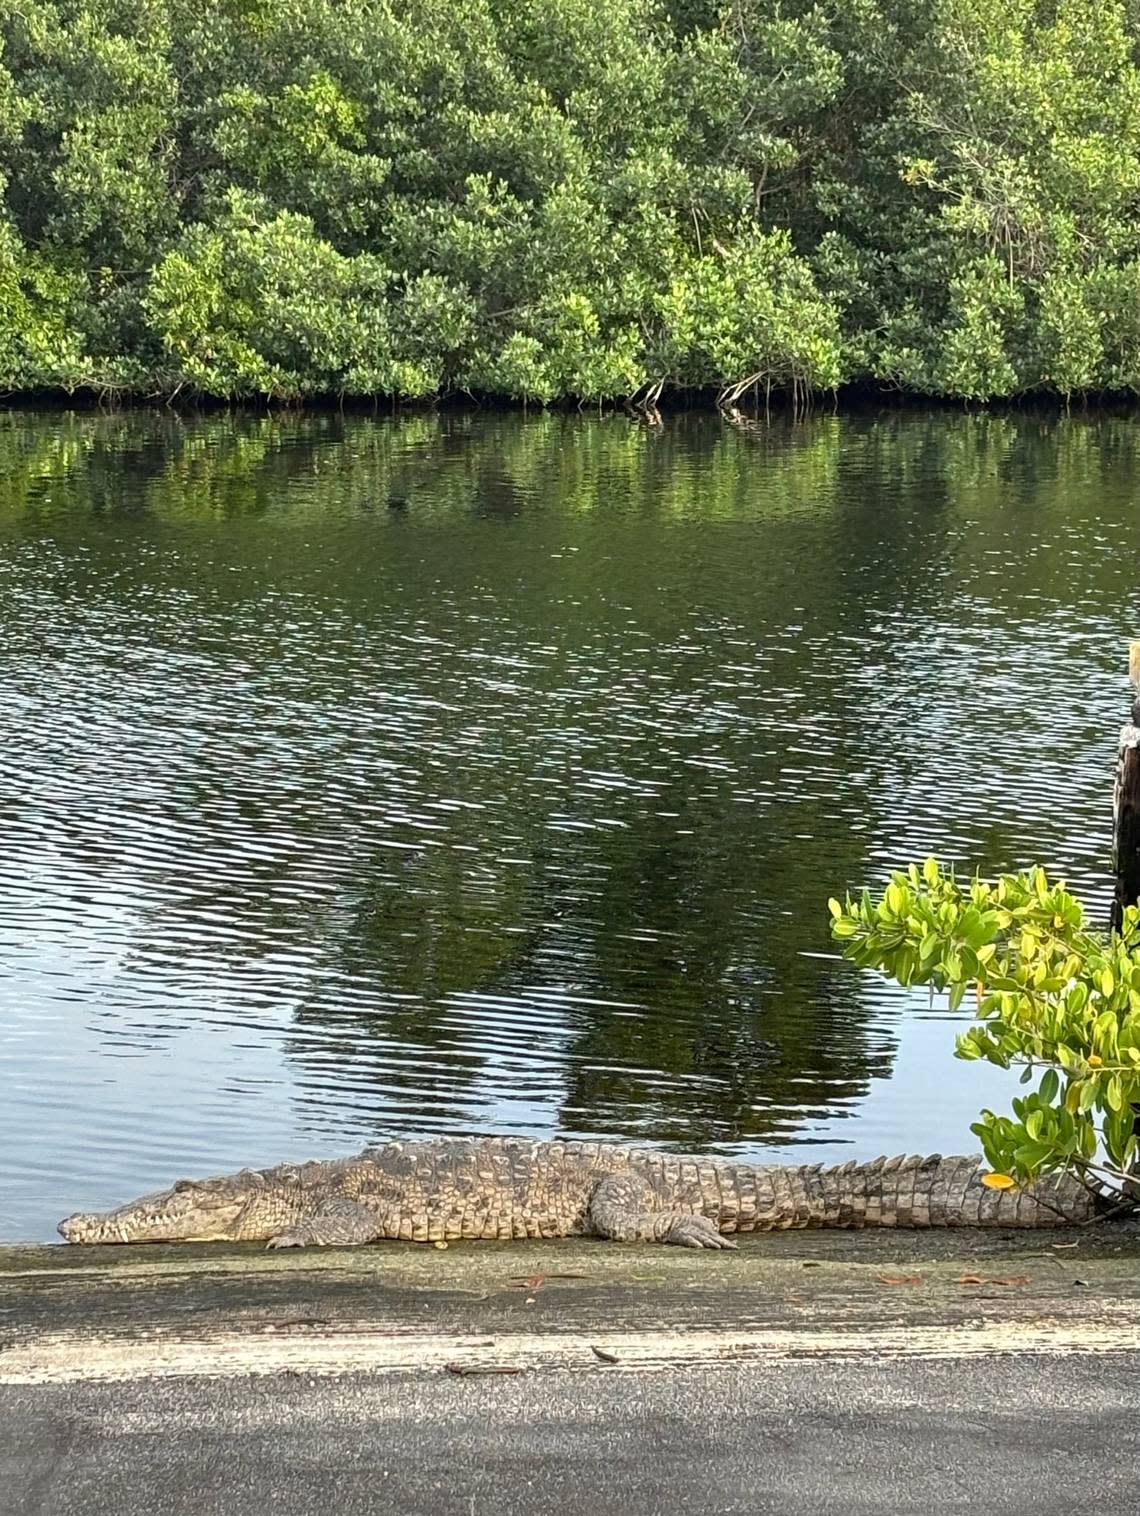 A crocodile lounges on the Whitewater Bay boat ramp in Flamingo, the southernmost National Park Service headquarters in Everglades National Park.